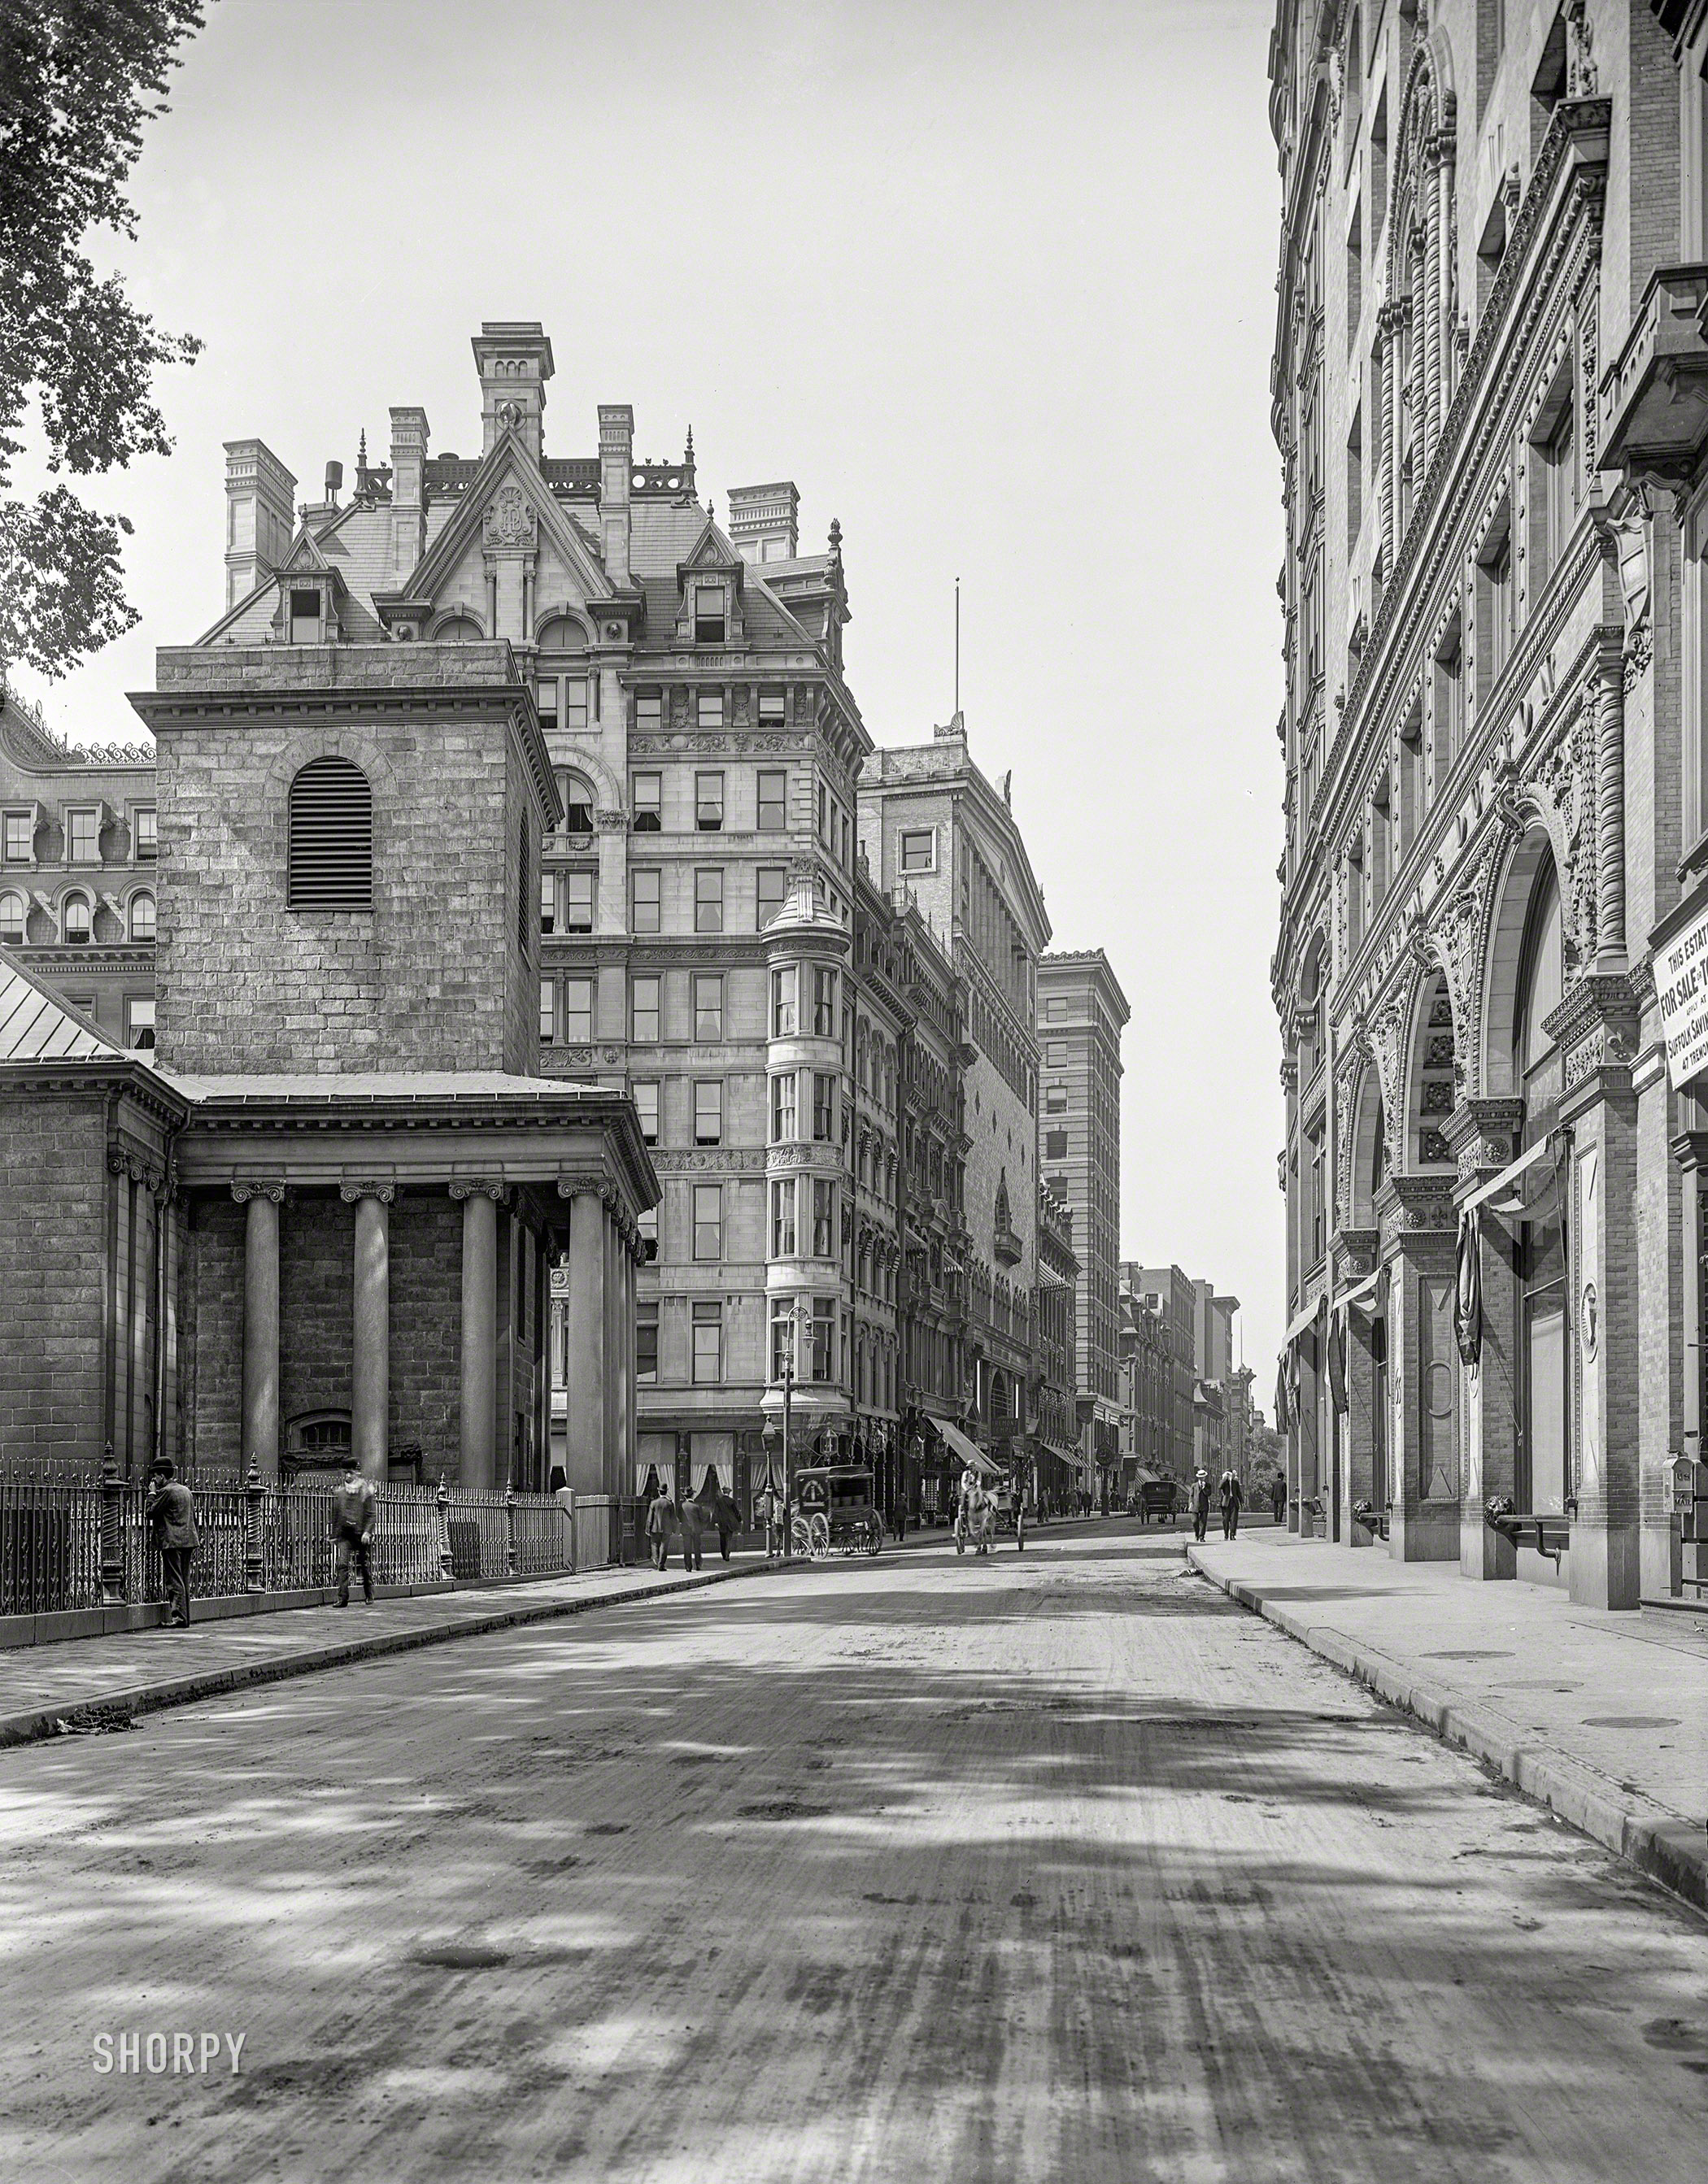 Boston, Massachusetts, circa 1906. "Tremont Street looking south -- King's Chapel and Tremont Temple." 8x10 inch glass negative, Detroit Publishing Company. View full size.